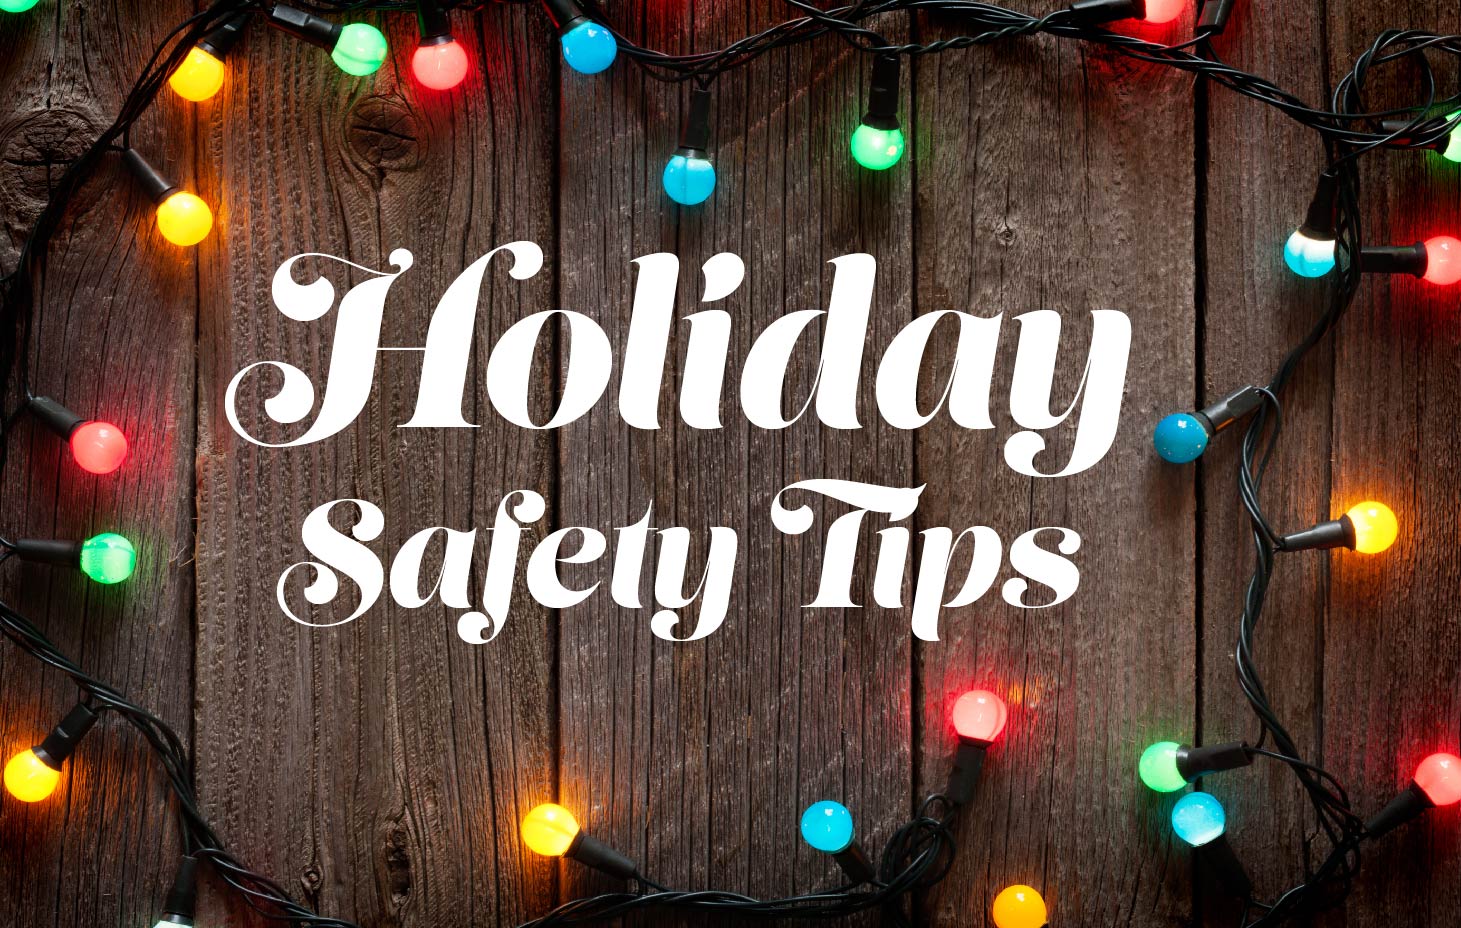 Holiday Safety Tips from FBC Pct. 4 Constable's Office